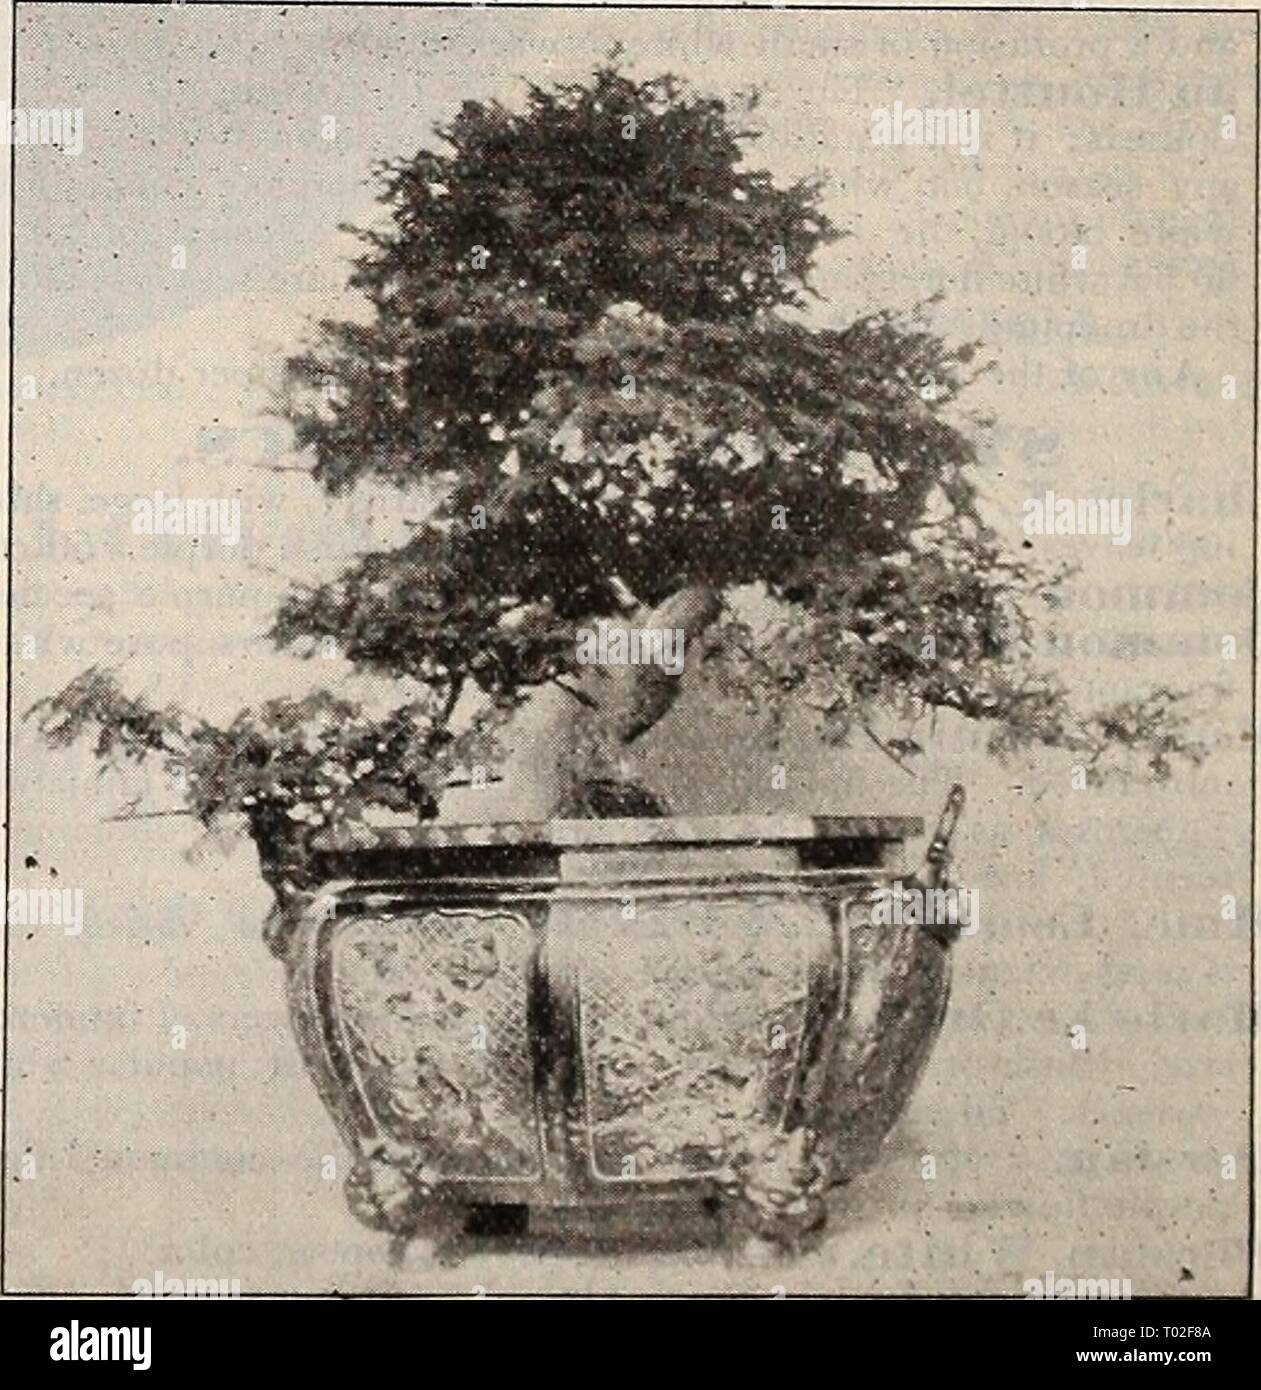 Dreer's garden calendar : 1900 . dreersgardencale1900henr Year: 1900  IVEIGEEIAS. Eva liathke. It is rarely that we notice decided novelties in this popular shrub, but in this variety we certainly have a grand acquisition, a variety that is at once a re- markably free bloomer and en- tirely distinct color, being a rich reddish- purple, quite different from anything here- tofore offered. (See cut.) 50 cis. each. Candida. Fine pure white flowers of large size. Rosea. The best known species and the best of â ir' its color. Rosea Nana Variegata. A neat dwarf shrub, valuable for the clearly defined Stock Photo